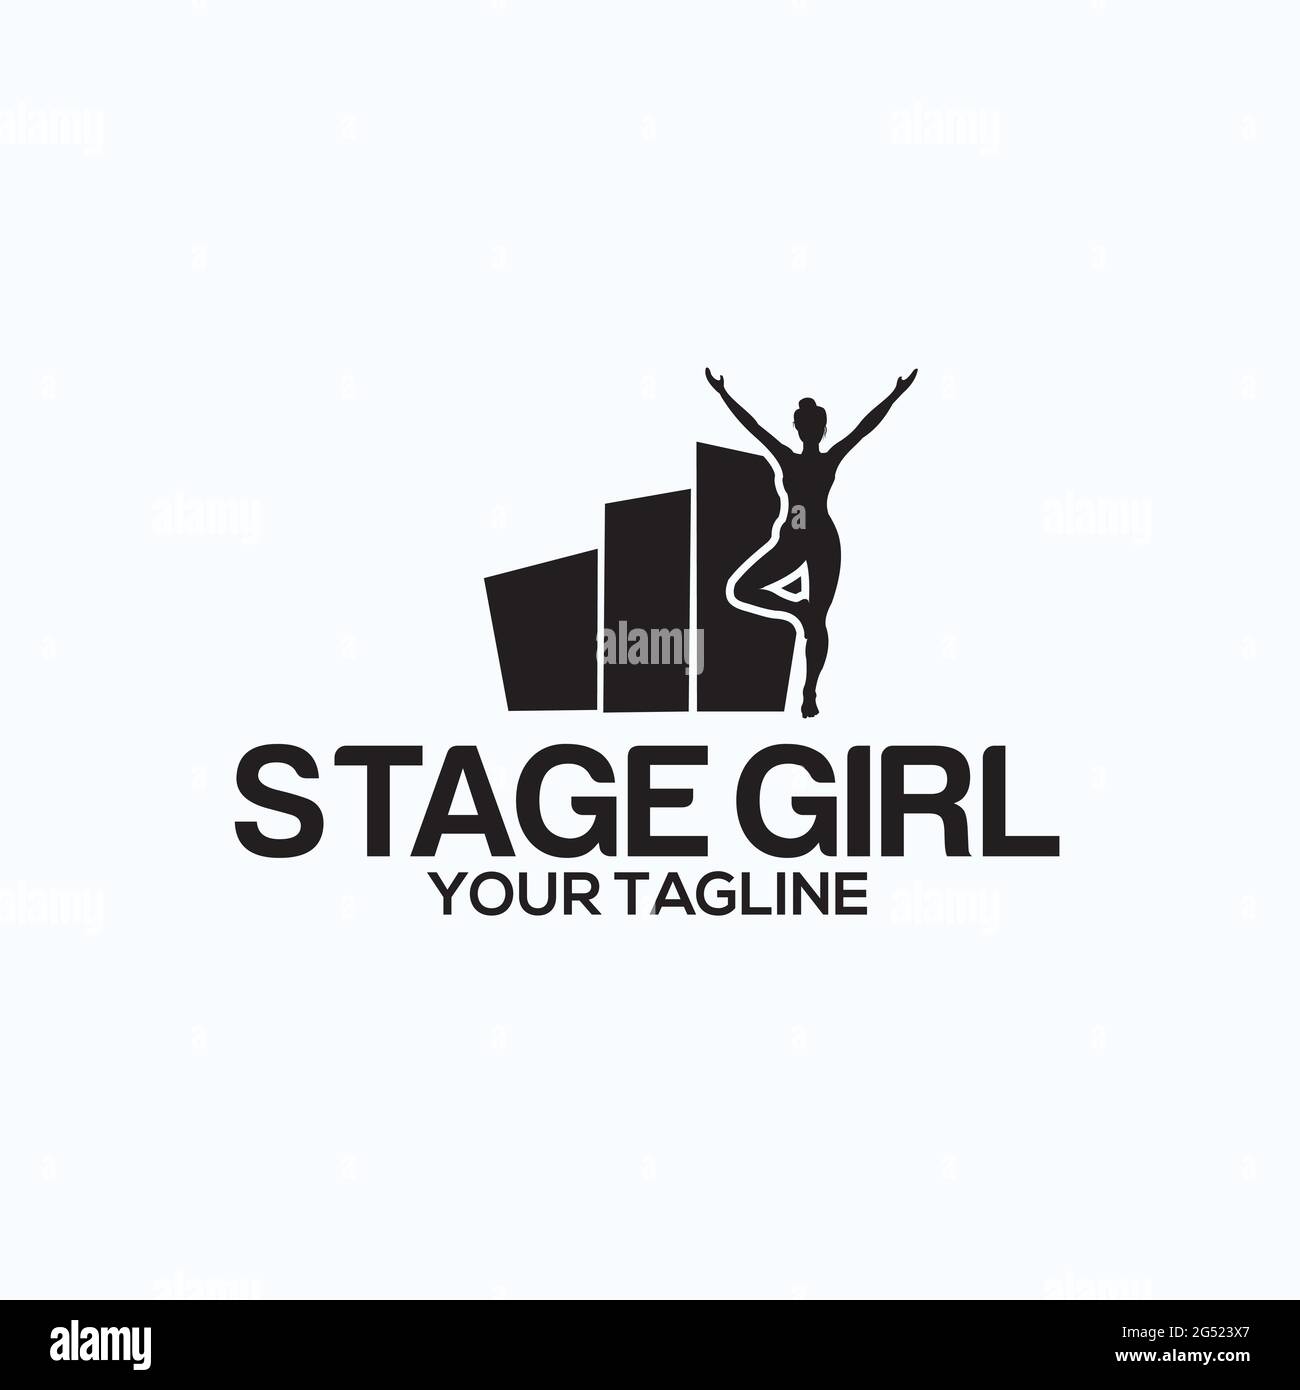 stage girl exclusive logo design inspiration Stock Vector